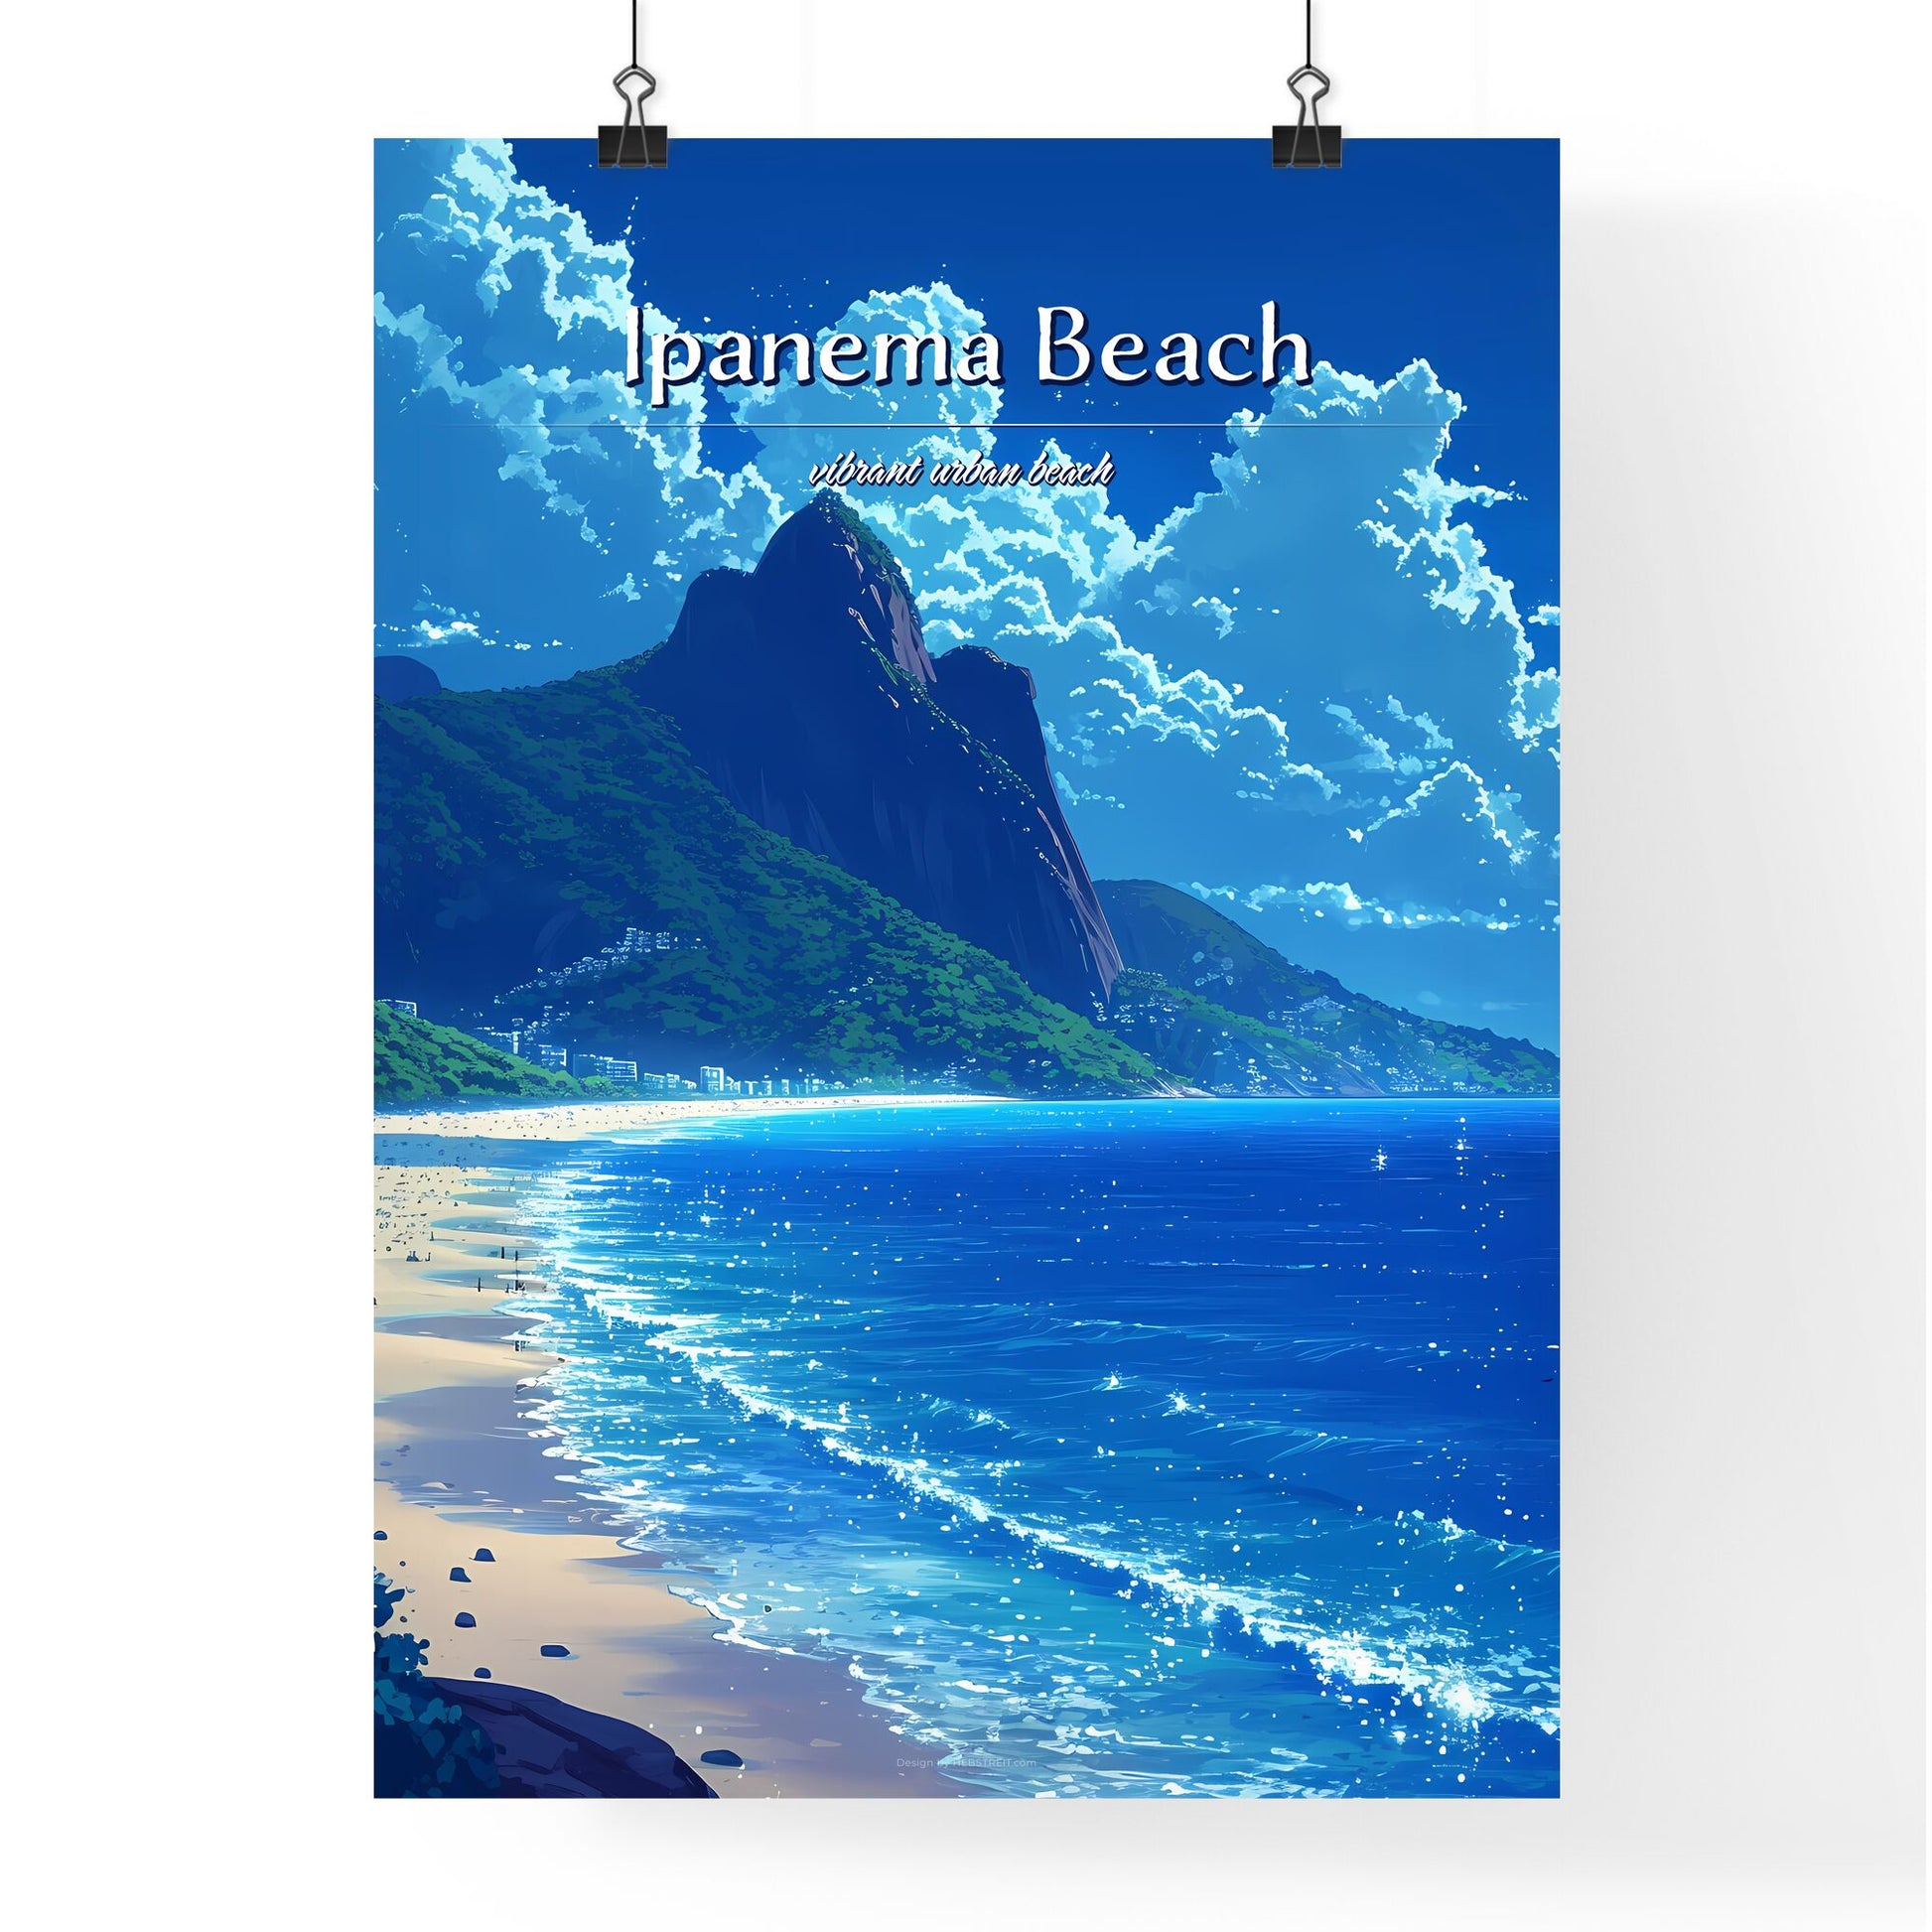 Ipanema Beach - Art print of a beach with mountains in the background Default Title